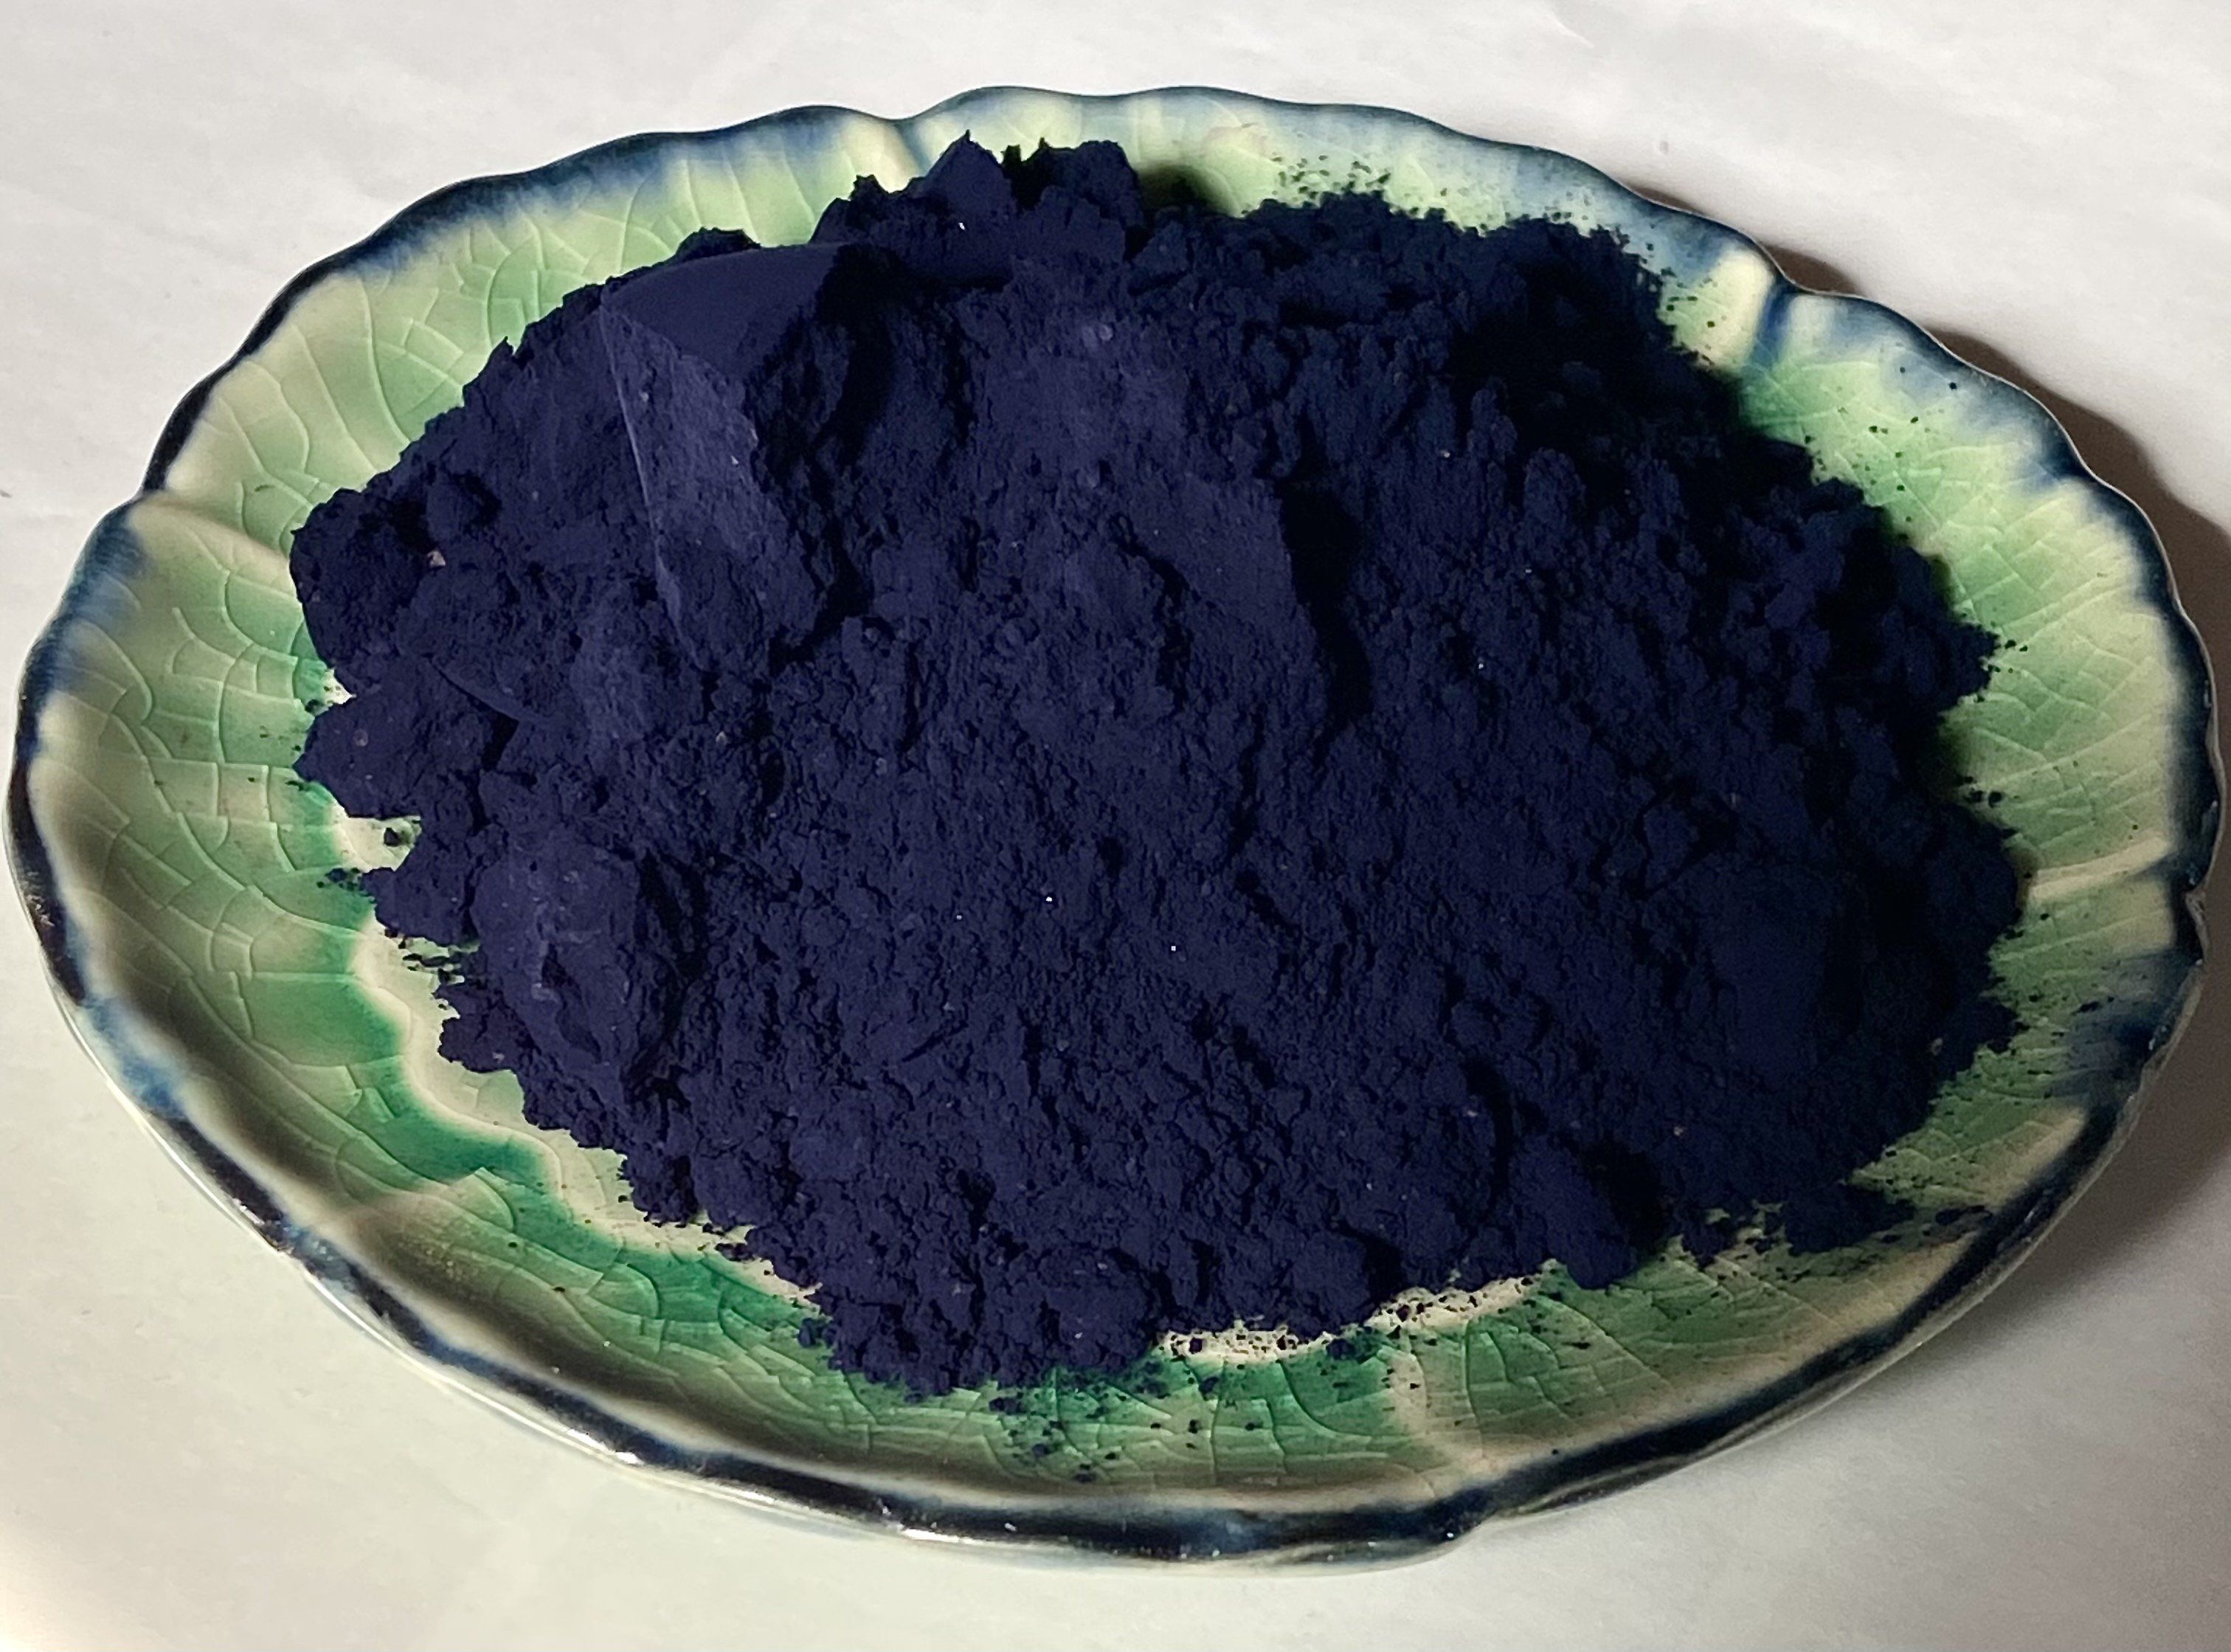 Indigo Dye Powder Photos and Images & Pictures